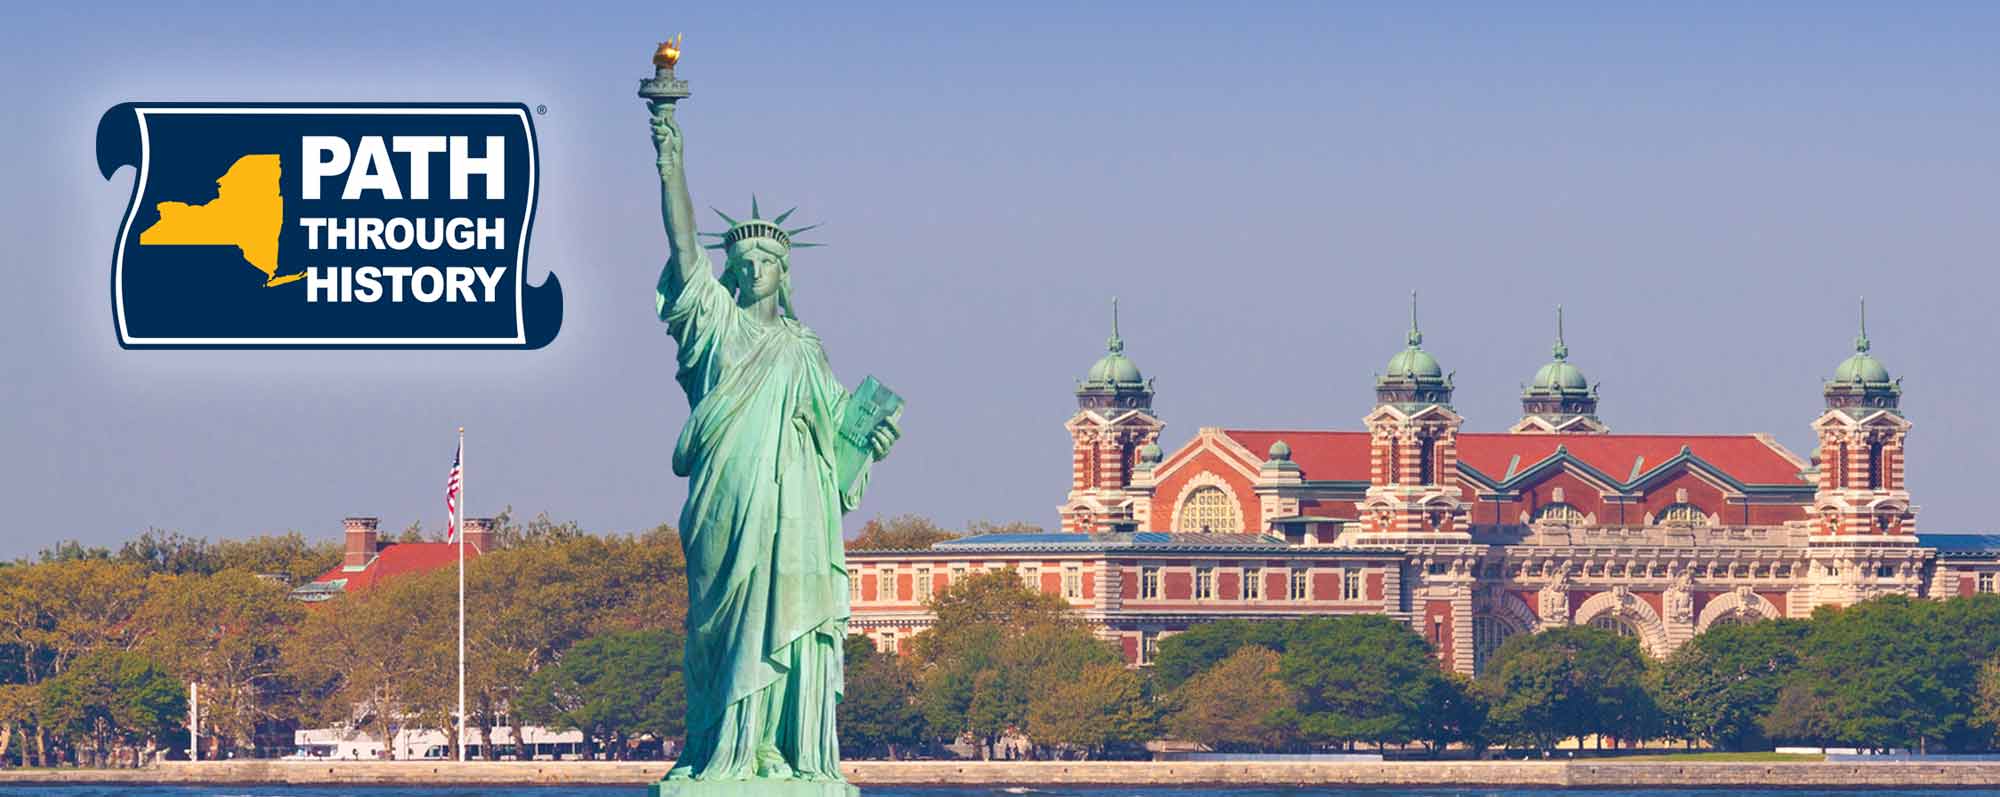 The Path Through History logo on a photo with the Statue of Liberty and Ellis Island